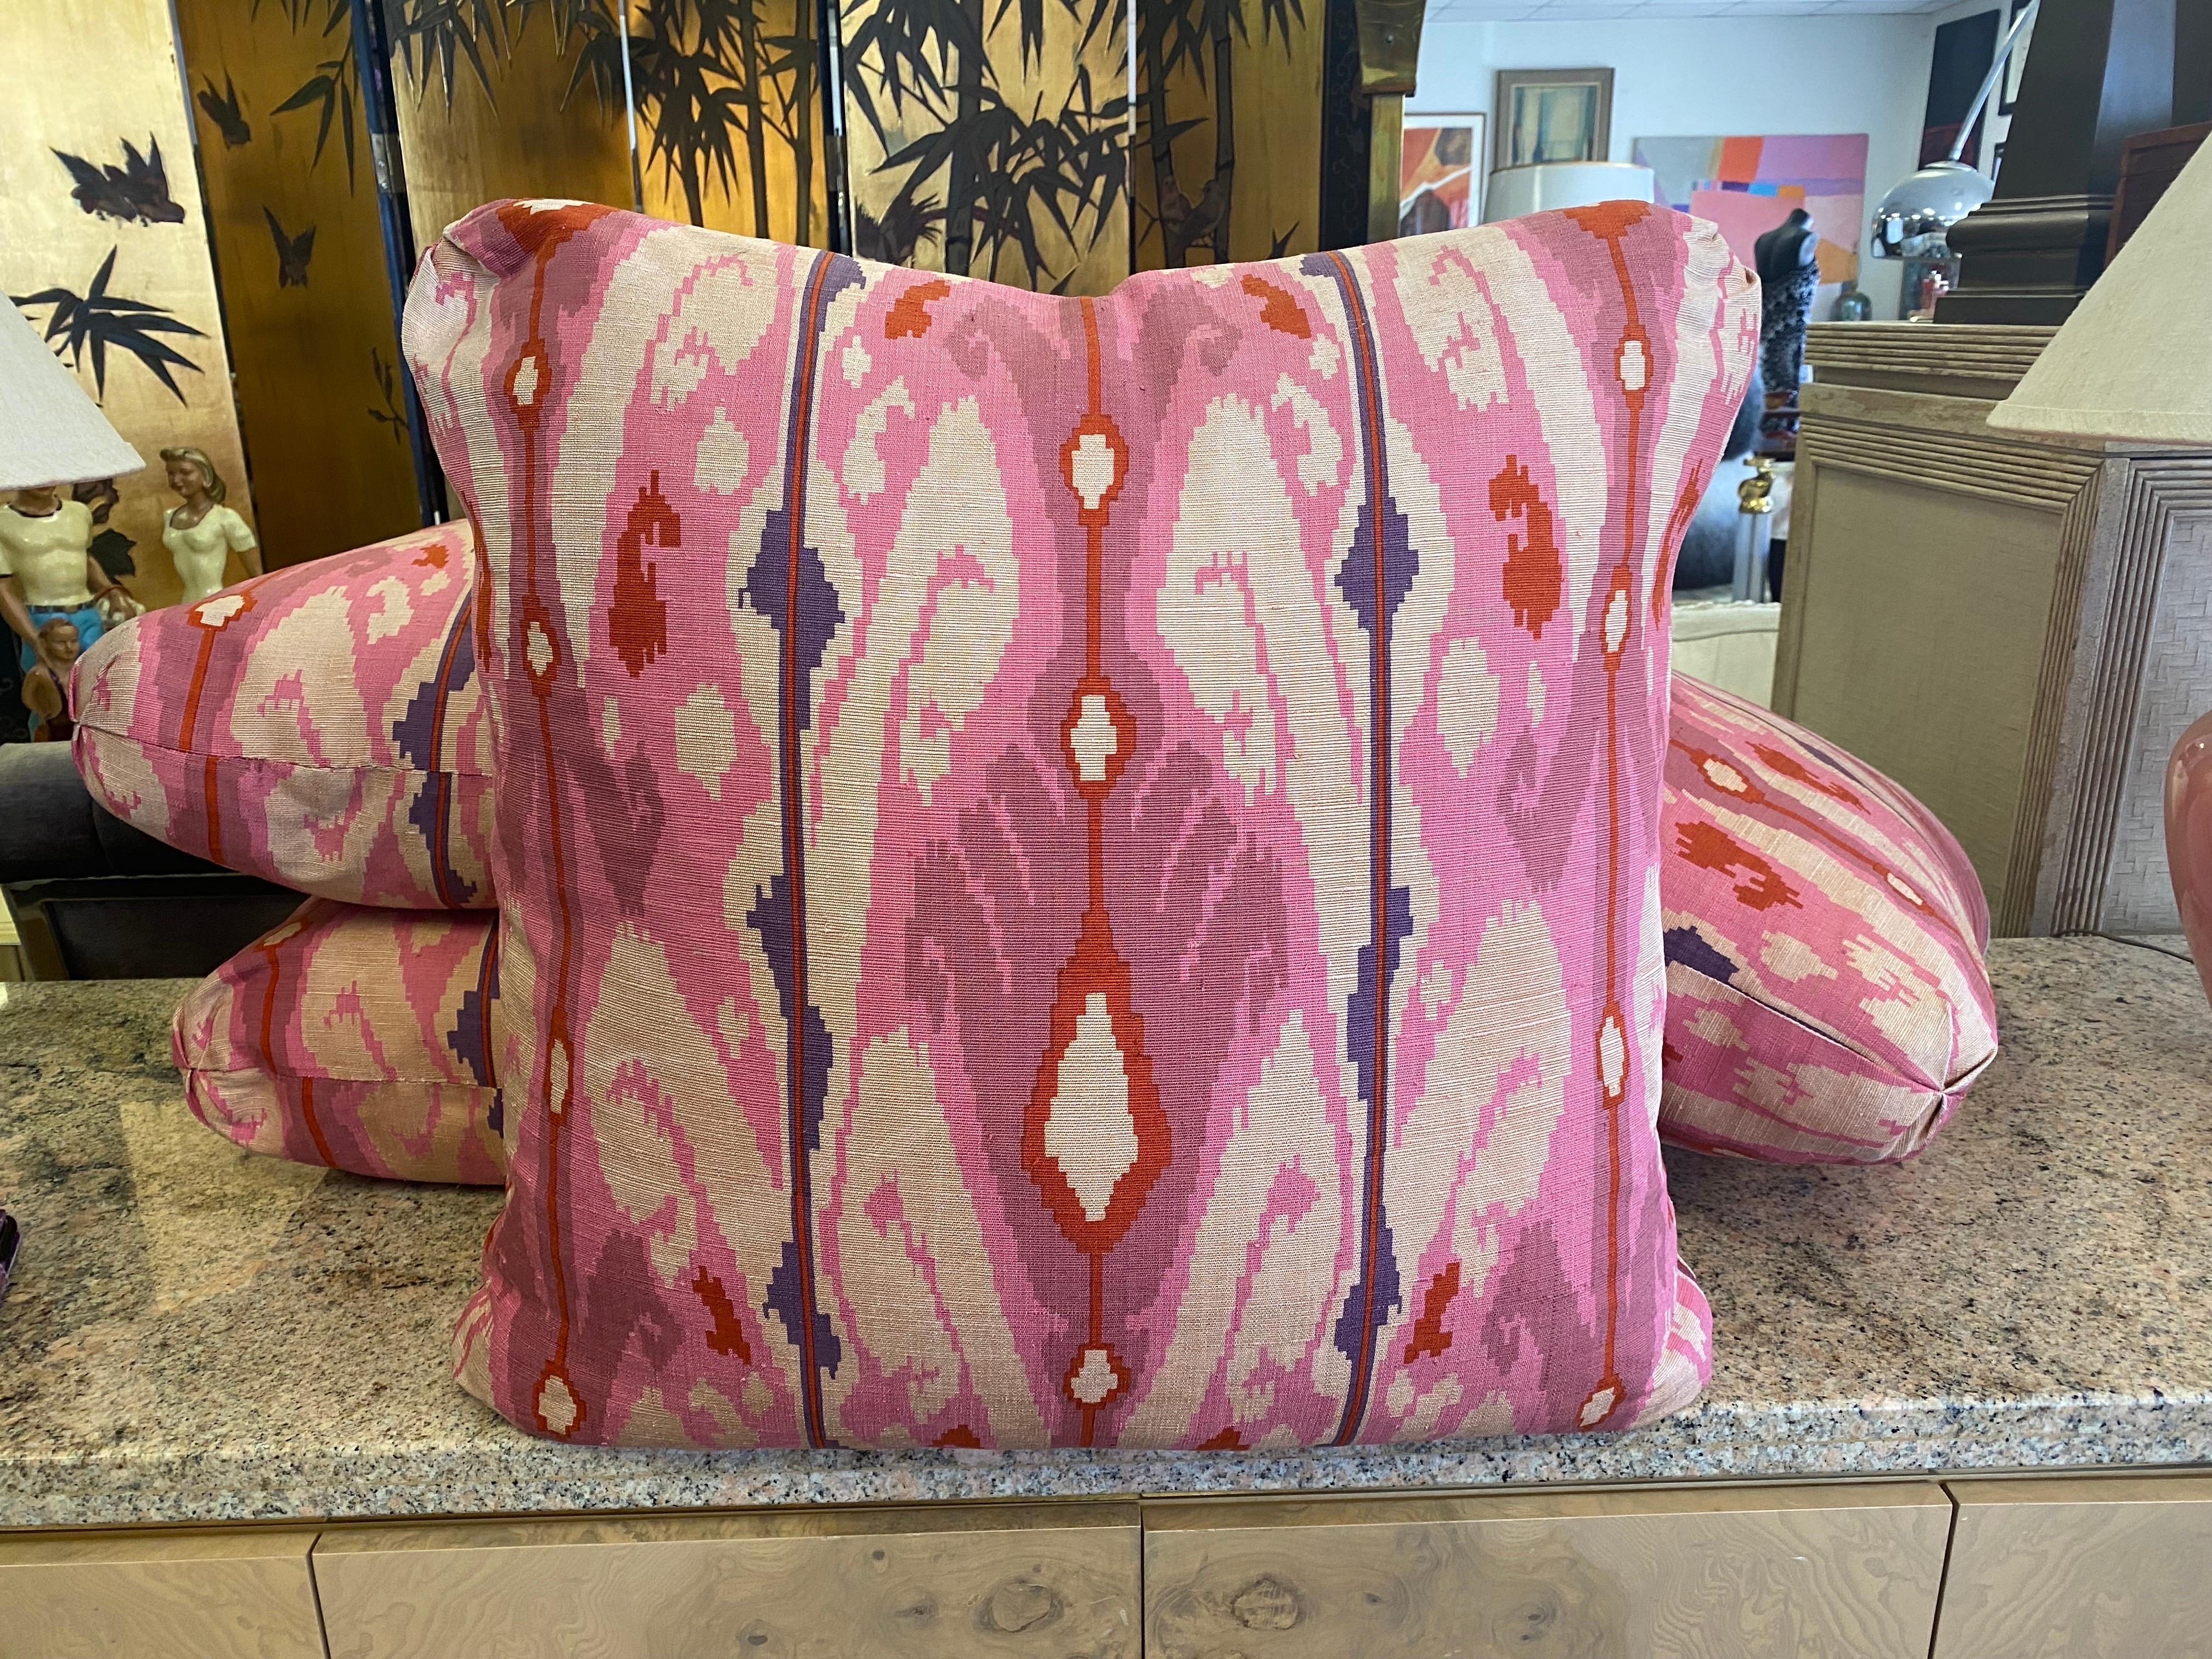 Steve Chase Modern Ikat Print in Pink and Tan Designed Pillows (8 Available) In Good Condition For Sale In Palm Springs, CA